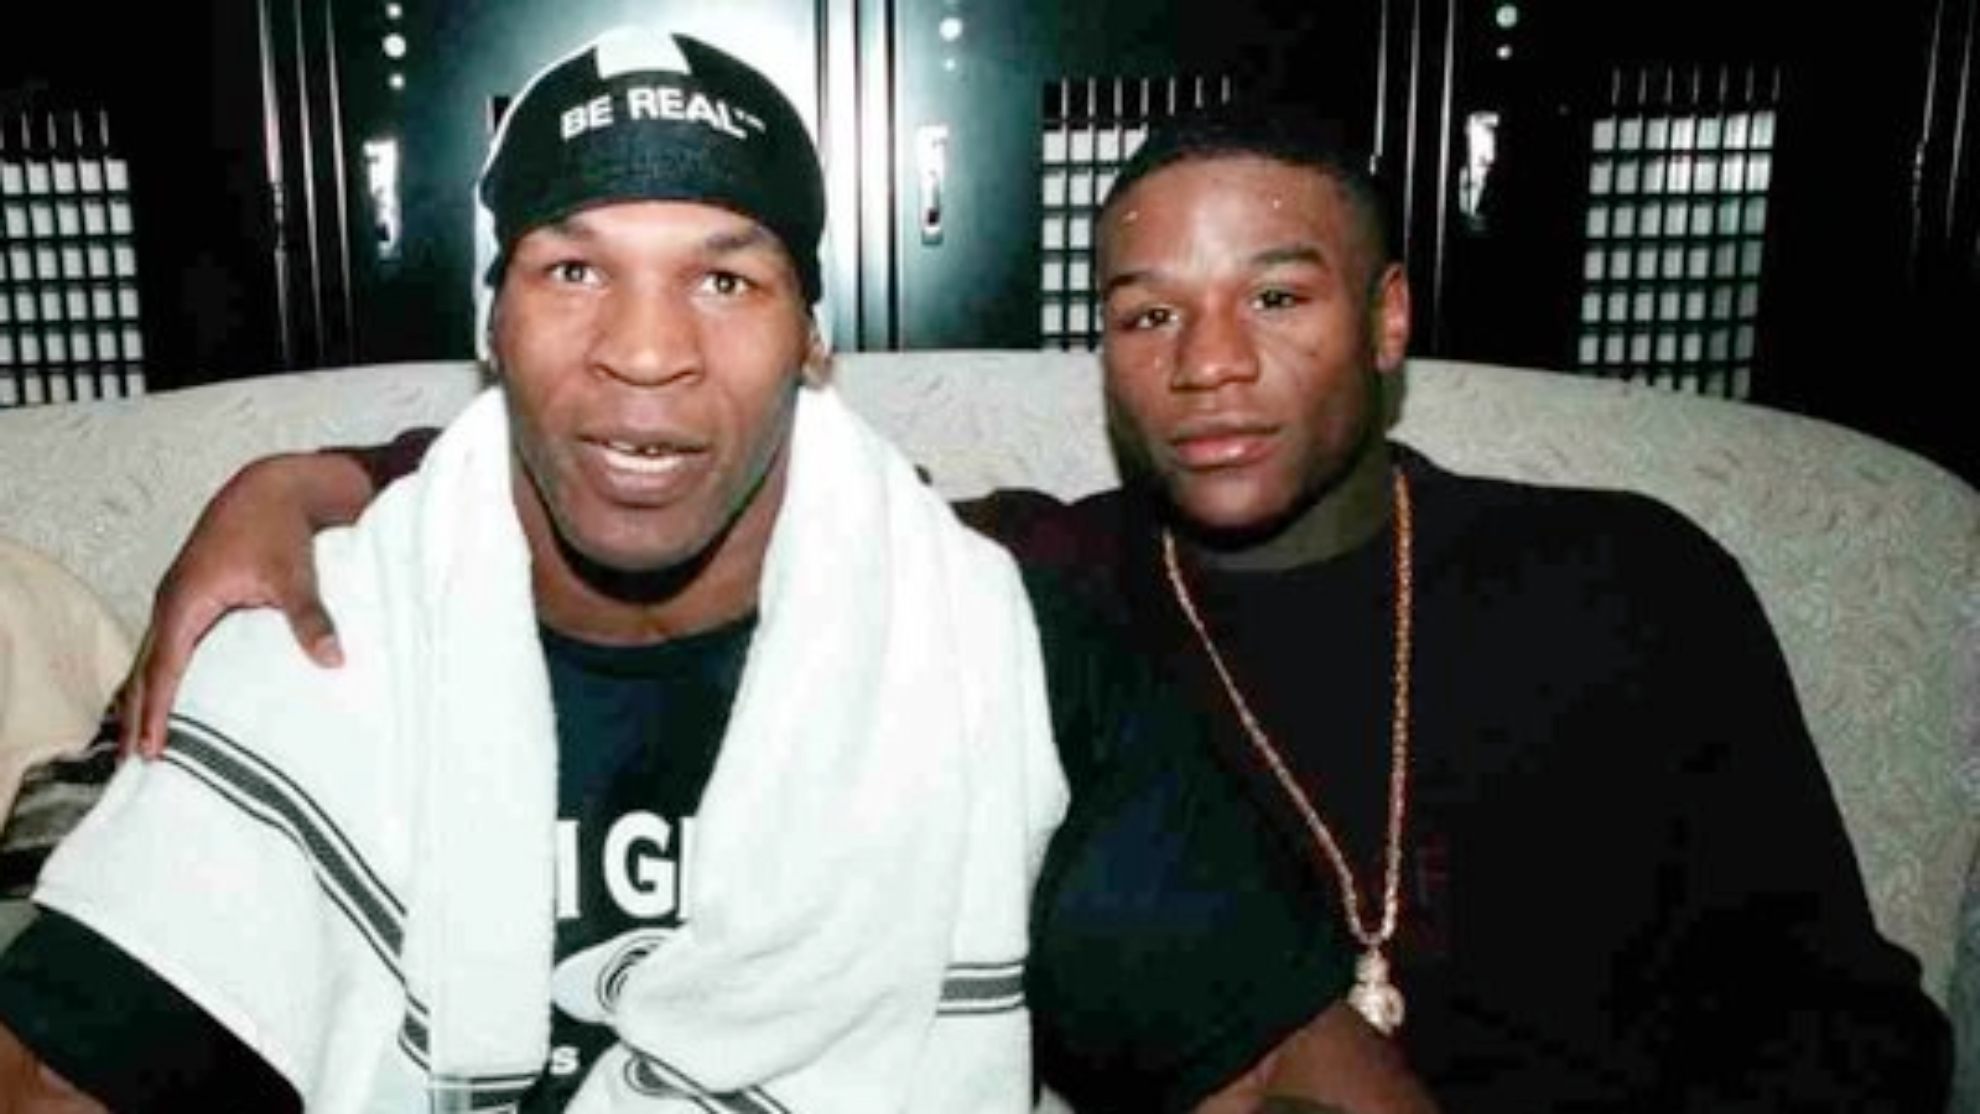 bao floyd mayweather surprised the world by gifting mike tyson a rolls royce cullinan supercar to congratulate his fellow boxer on successfully securing two prestigious championship belts 654f021cf0eee Floyd Mayweather Surprised The World By Gifting Mike Tyson A Rolls-royce Cullinan Supercar To Congratulate His Fellow Boxer On Successfully Securing Two Prestigious Championship Belts.